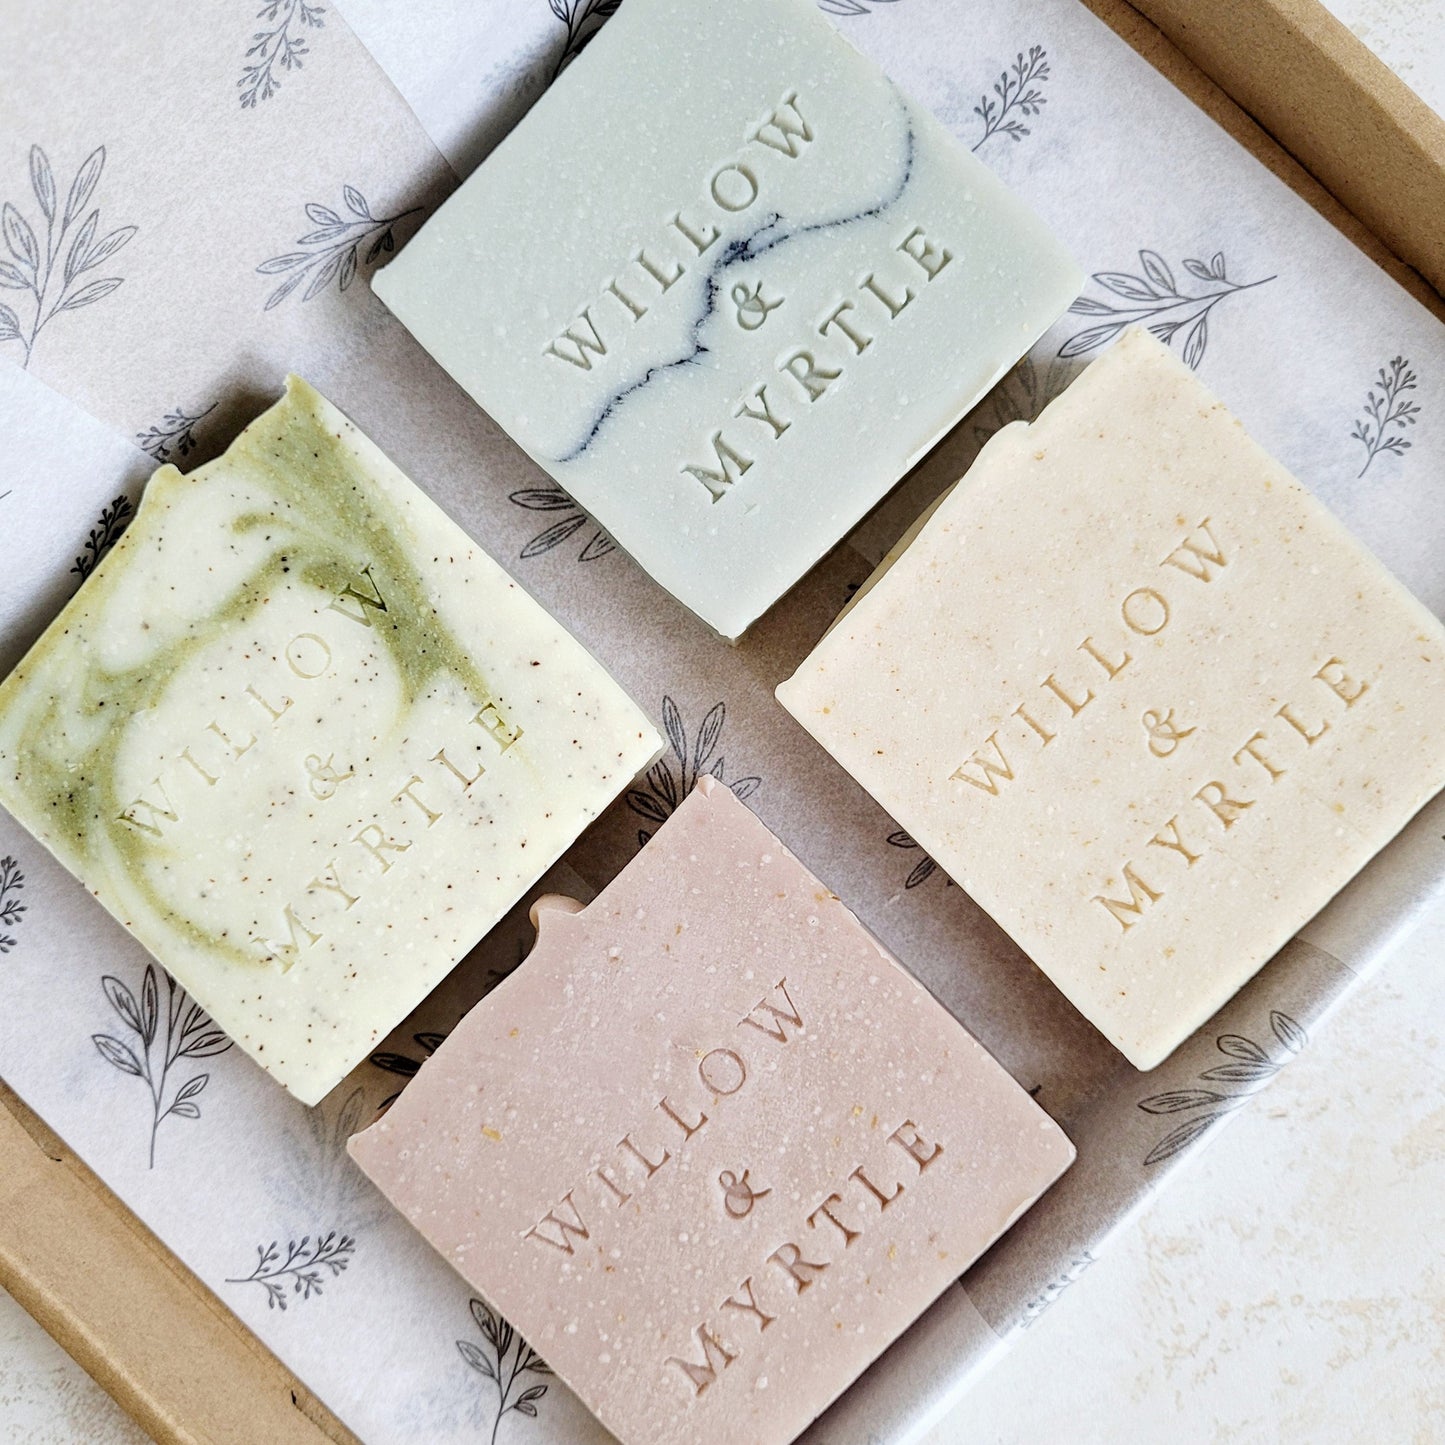 Monthly Soap Subscription Box